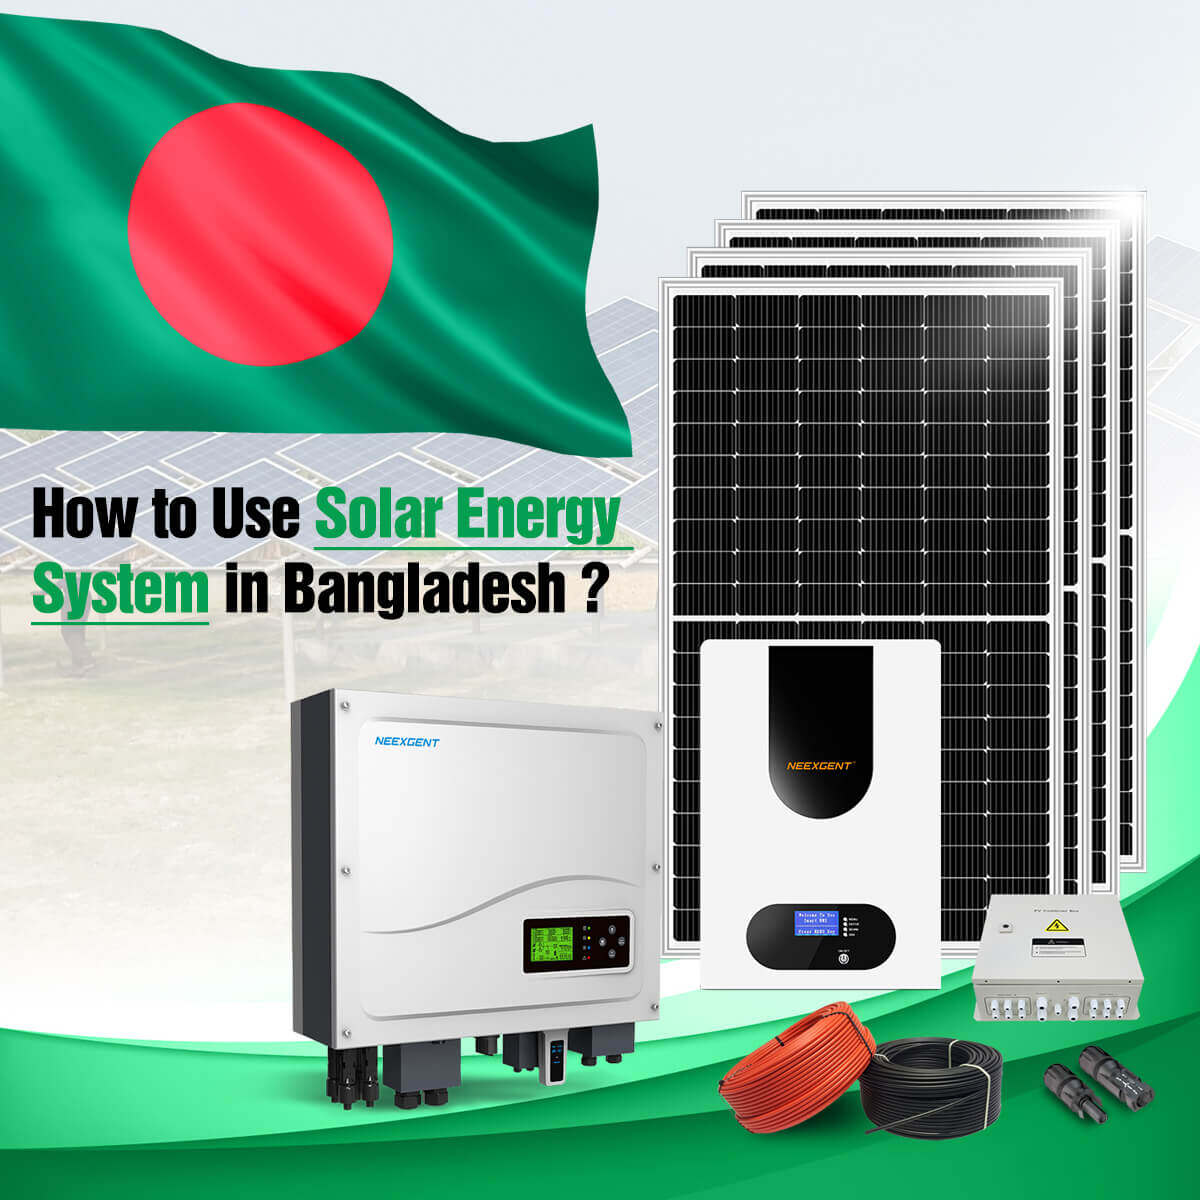 How to Use Solar Energy System in Bangladesh